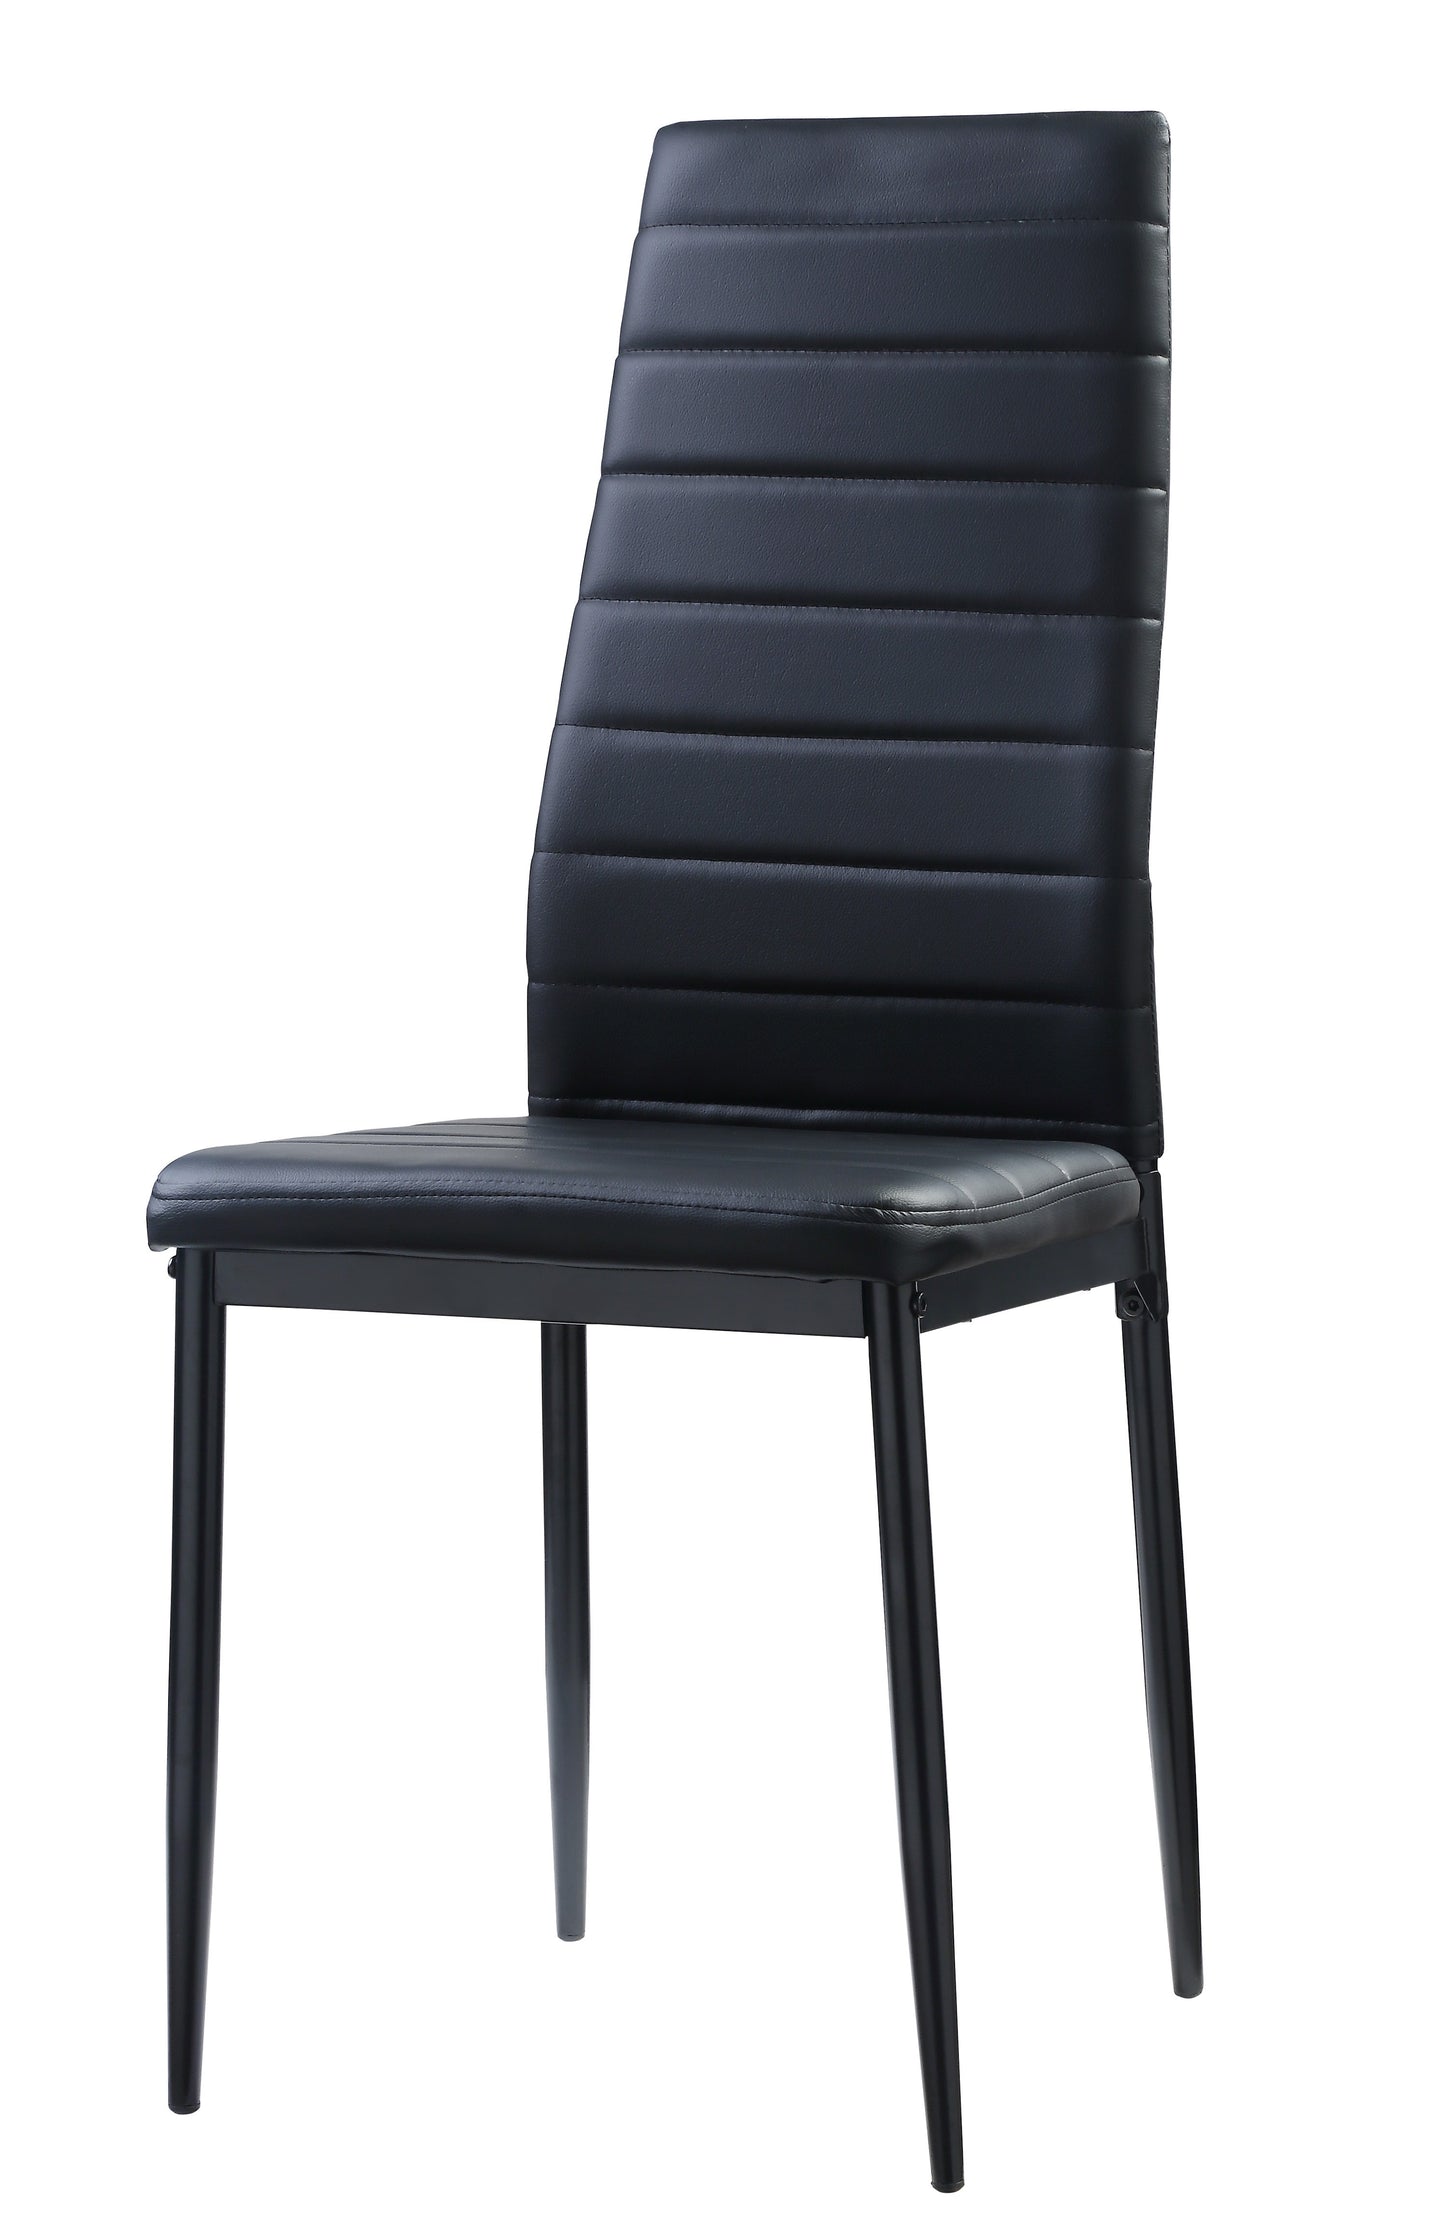 Homelegance Florian 4 Dining Side Chair in Black Leatherette